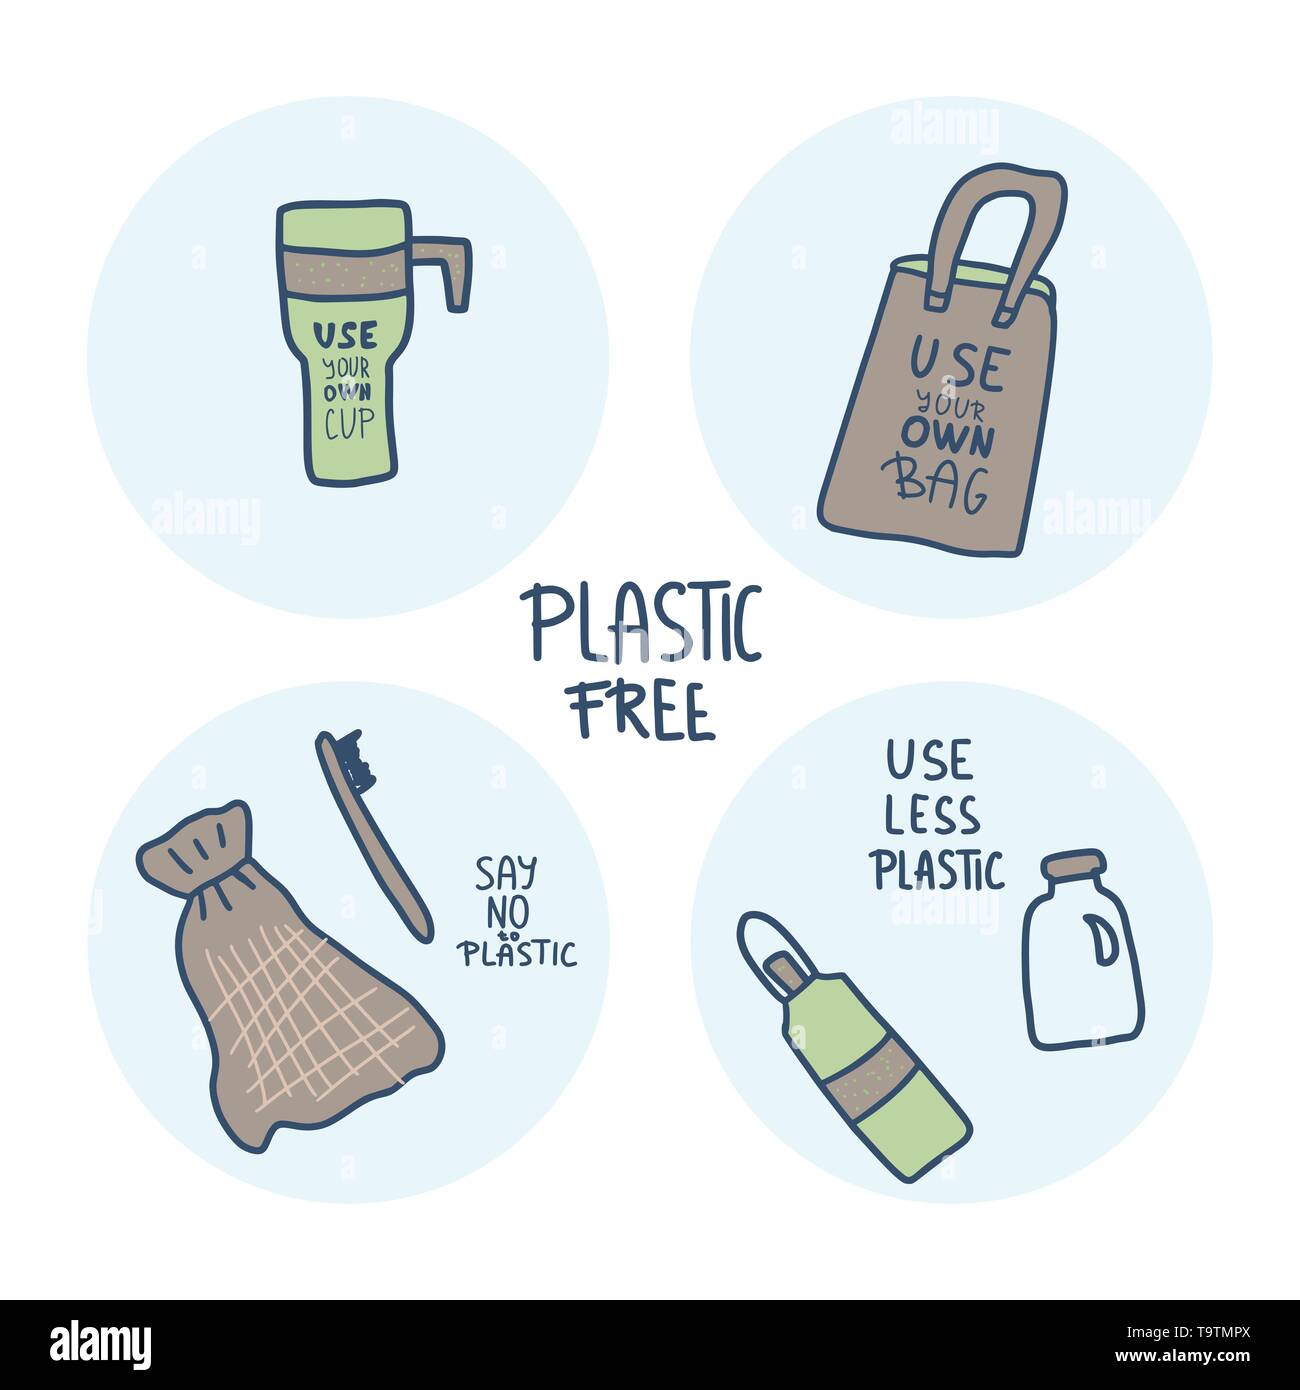 https://c8.alamy.com/comp/T9TMPX/plastic-free-concept-quote-with-eco-lifestyle-elements-isolated-on-white-background-emblem-with-handwritten-lettering-and-zero-waste-symbols-set-in-T9TMPX.jpg